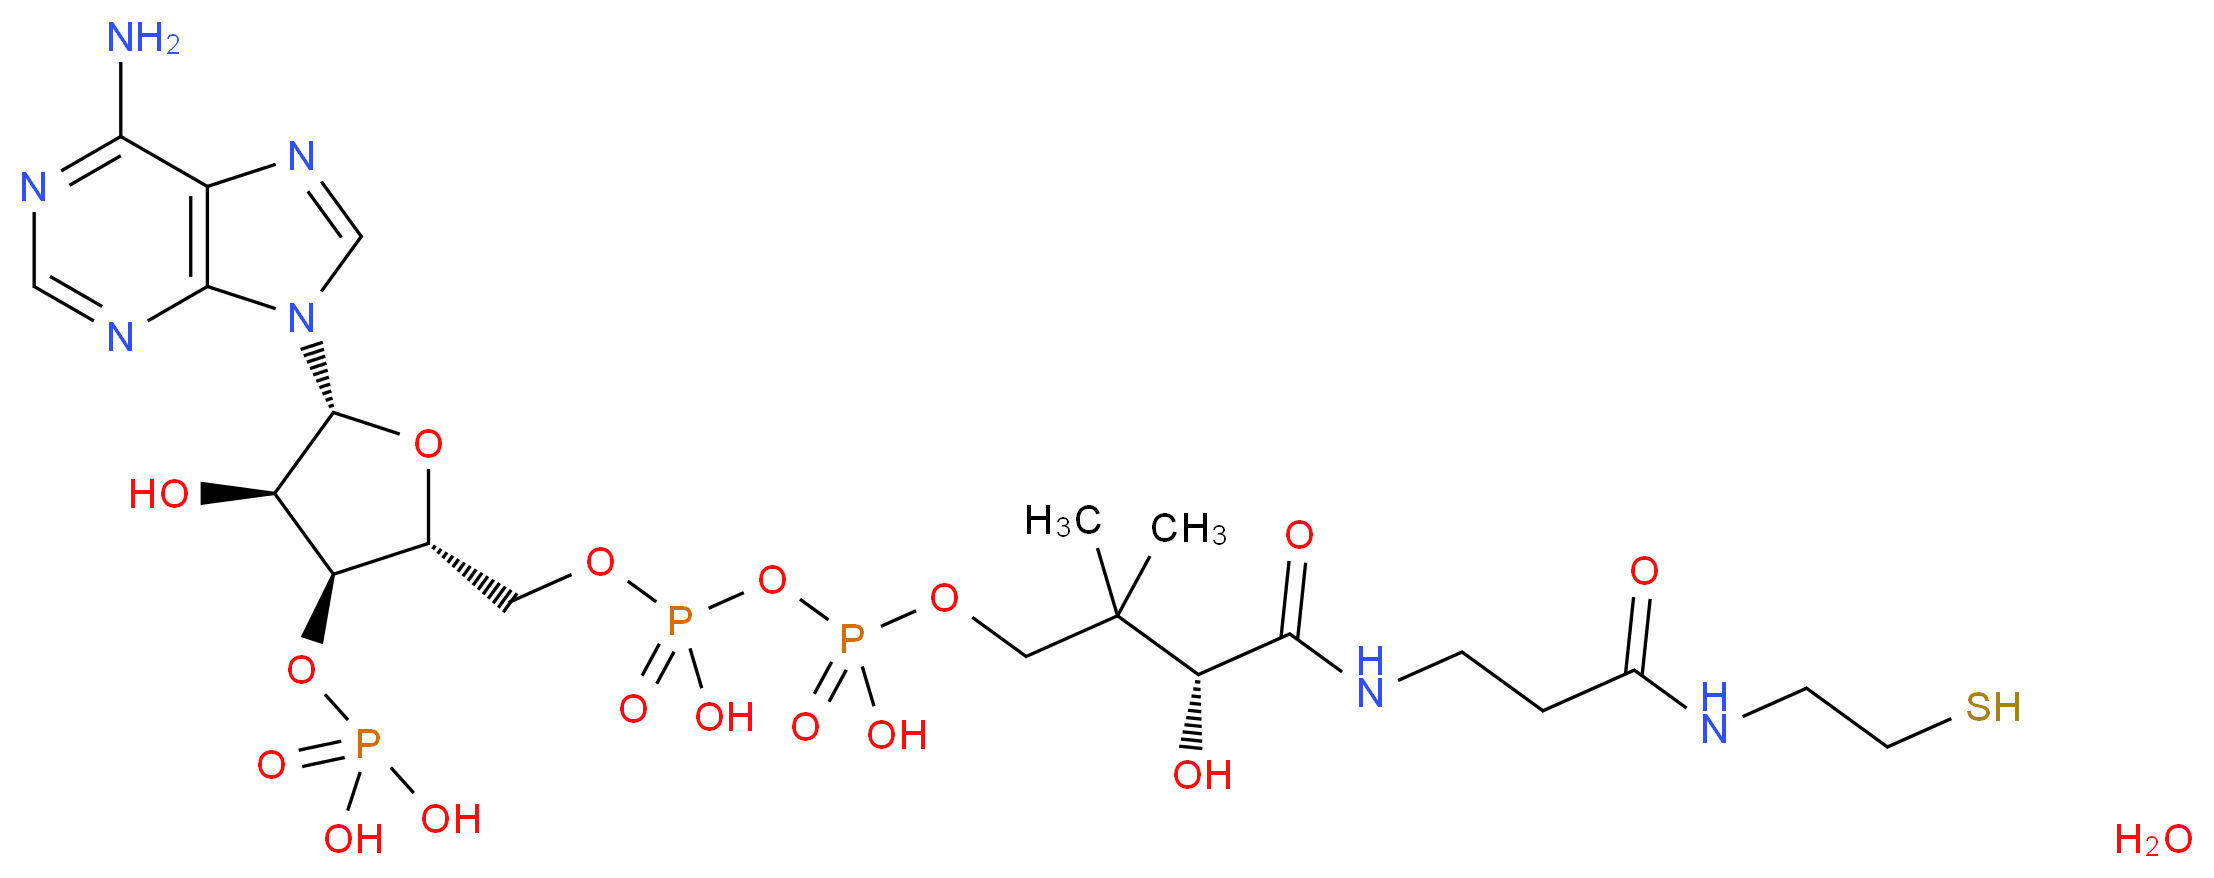 Coenzyme A hydrate_Molecular_structure_CAS_85-61-0(anhydrous))